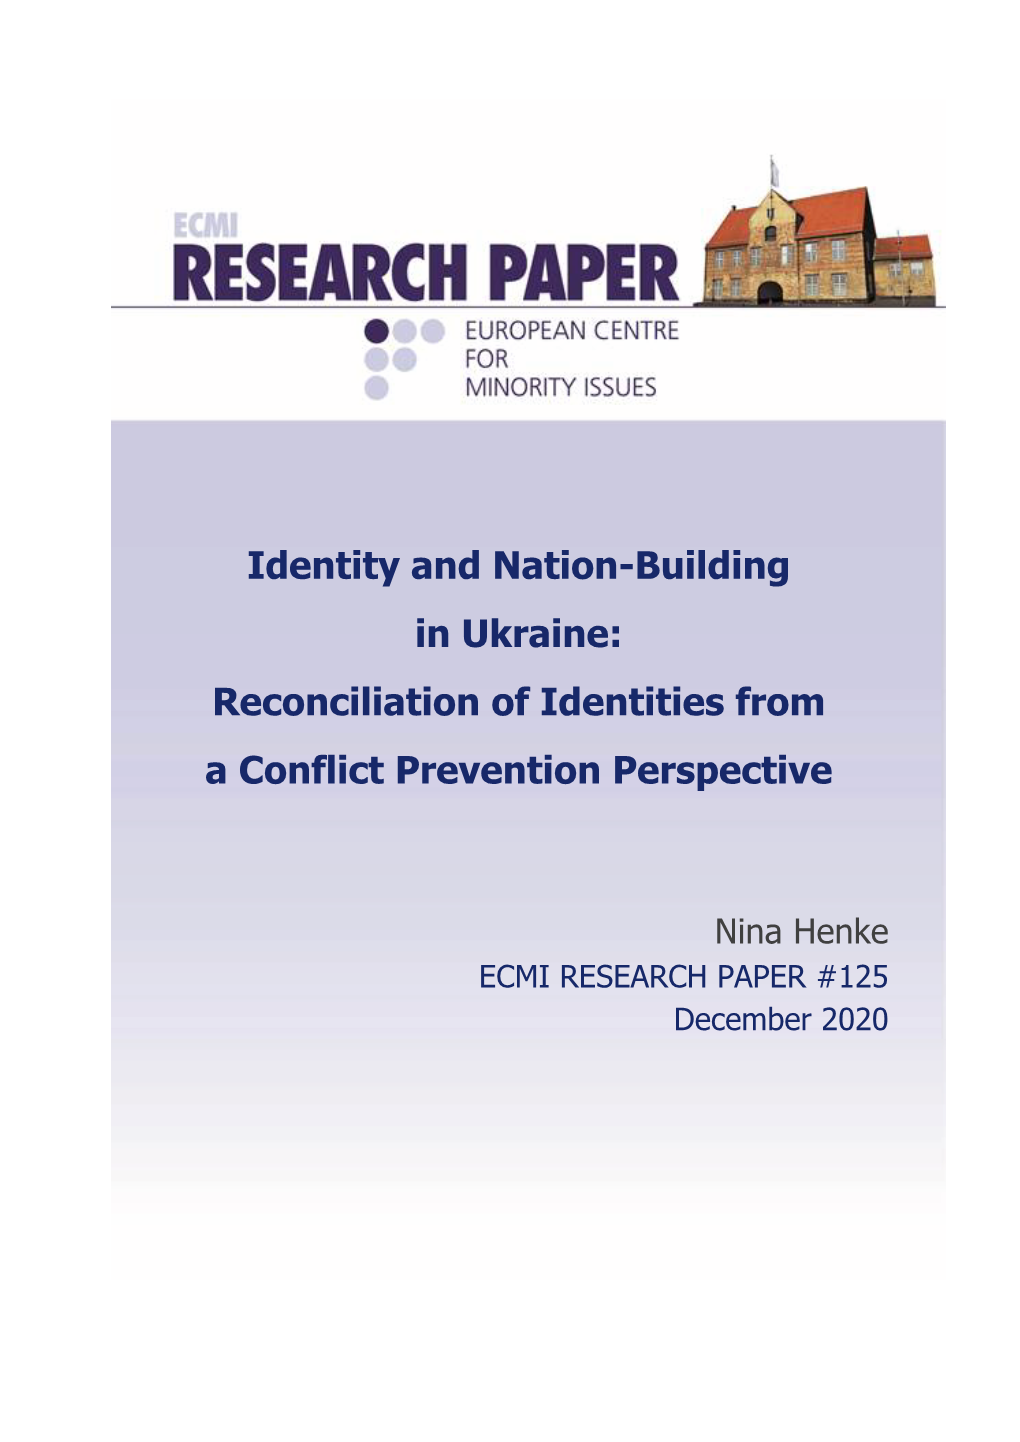 Identity and Nation-Building in Ukraine: Reconciliation of Identities from a Conflict Prevention Perspective